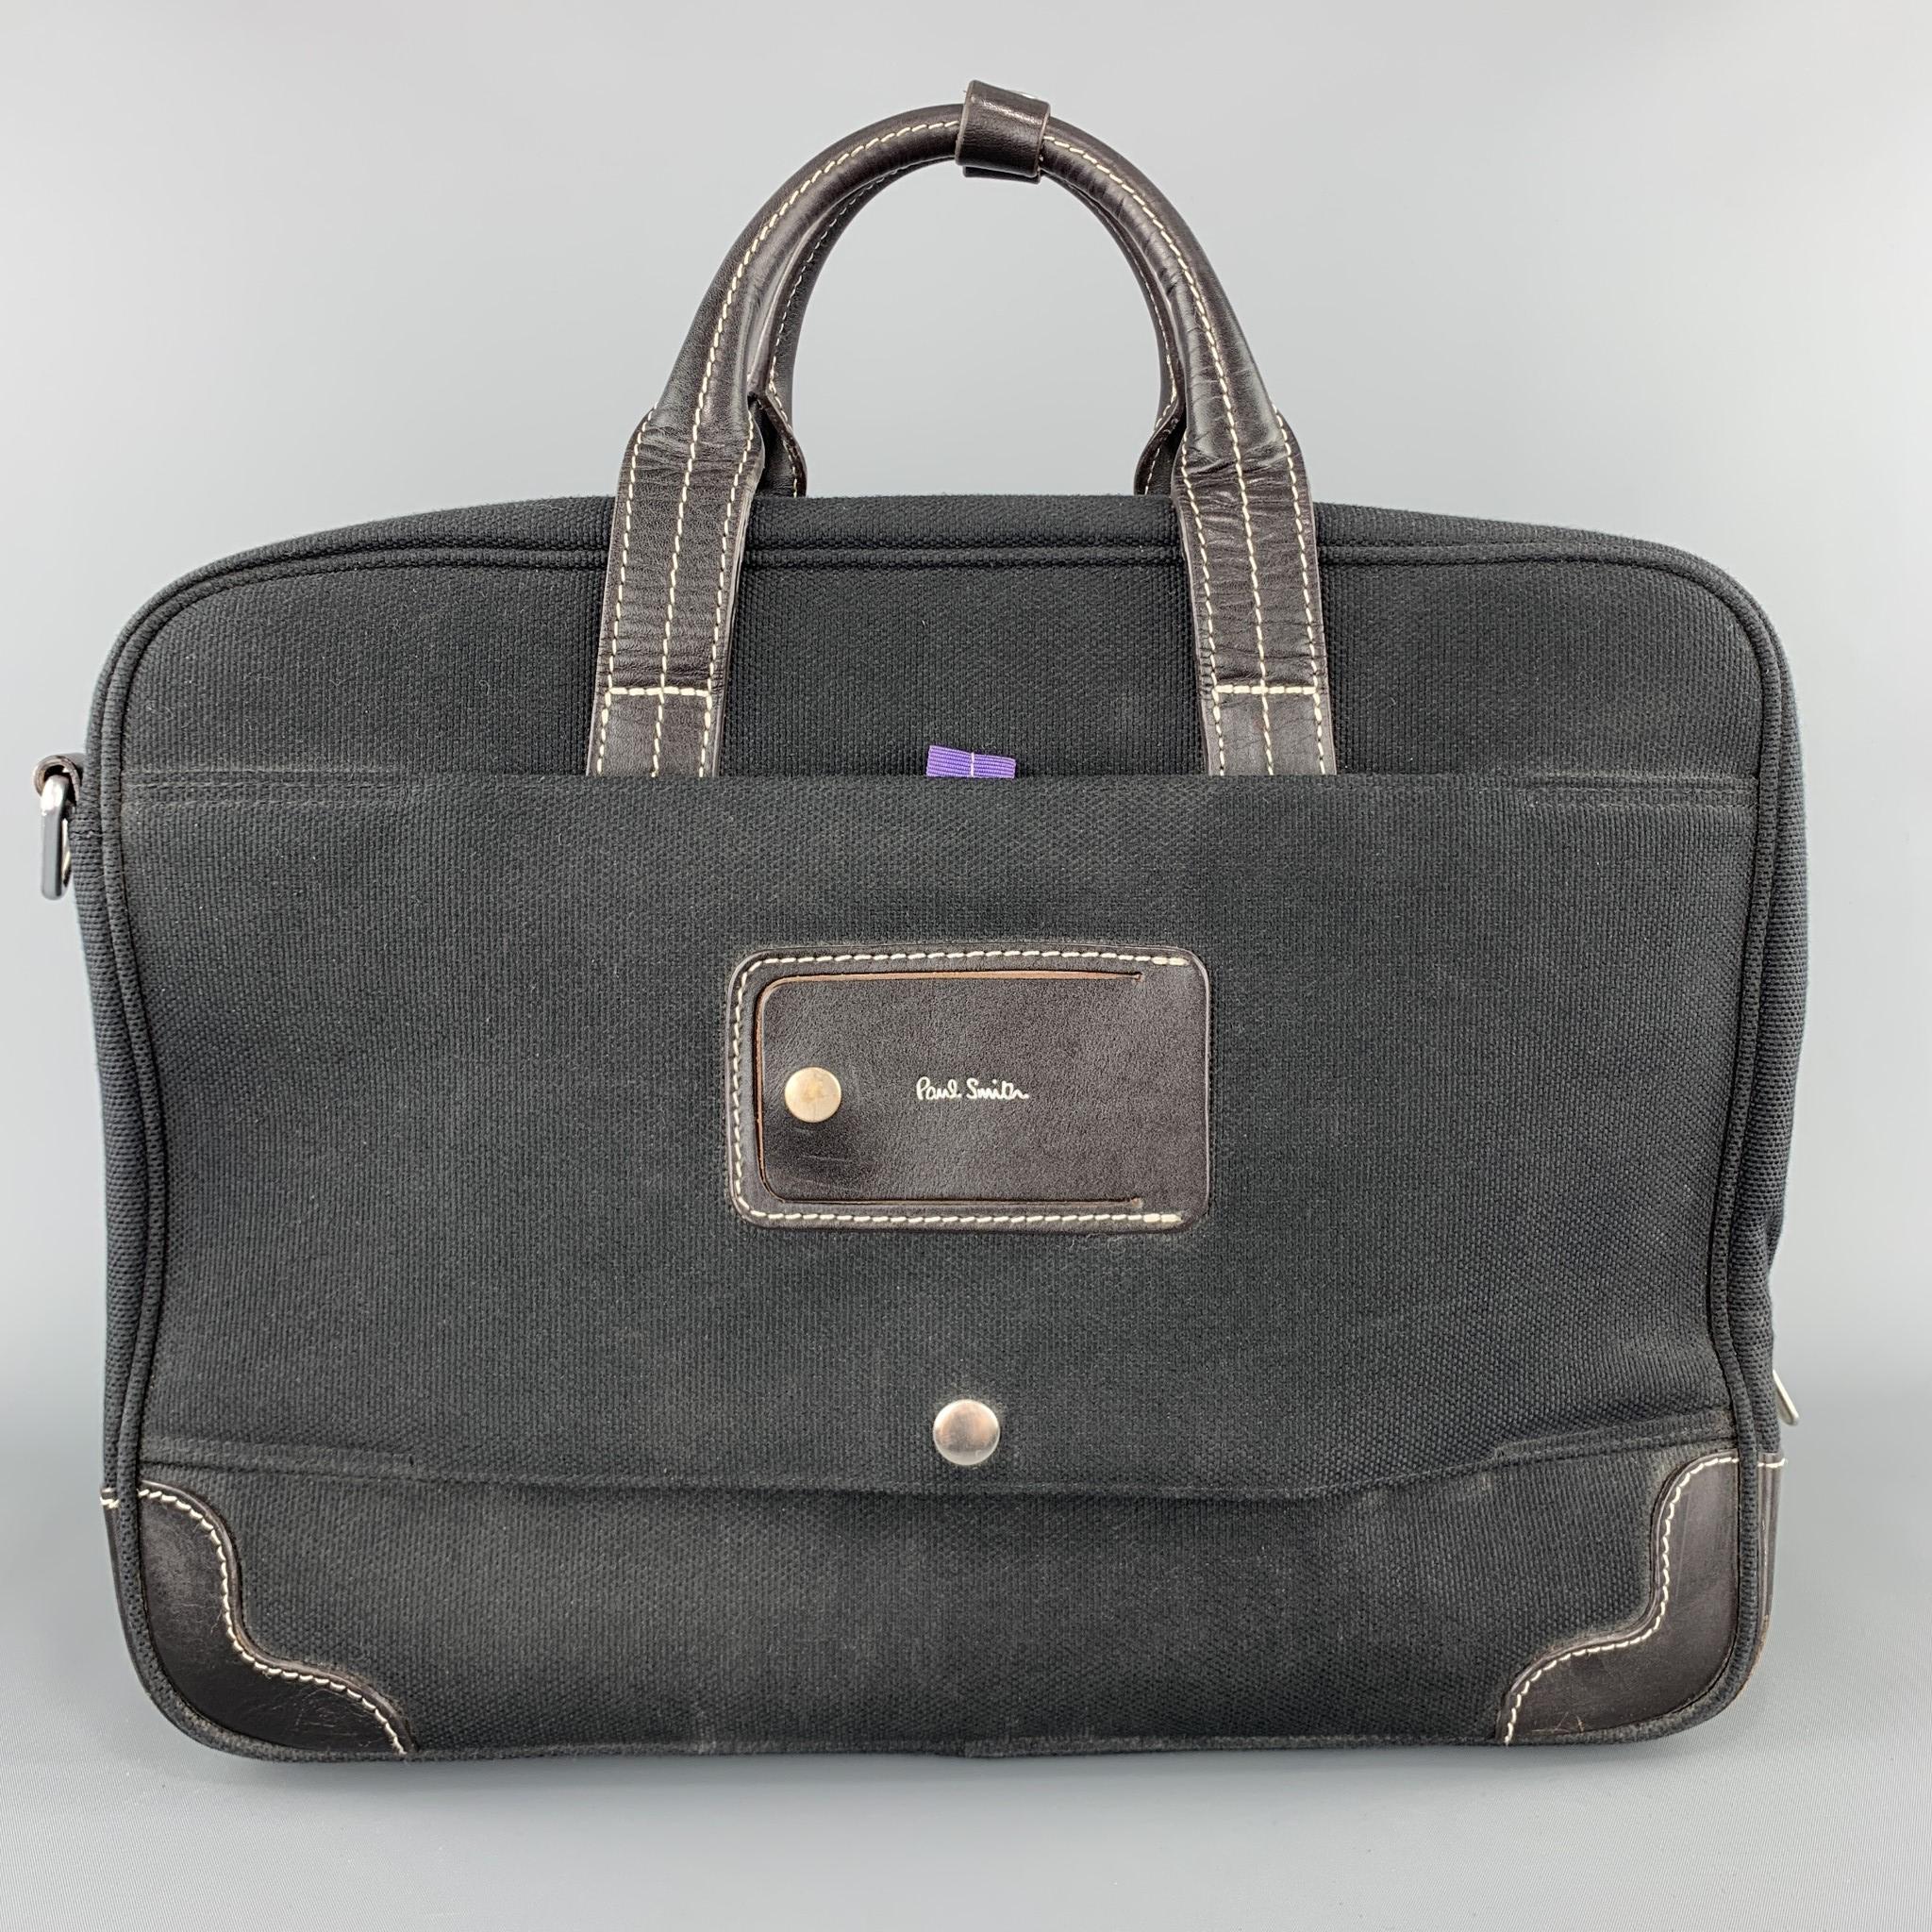 PAL SMITH work bag comes in black canvas with black leather trim, contrast stitching, double top handles, detachable strap, and purple multi-compartment interior. 

Good Pre-Owned Condition.

Measurements:

Length: 15.5 in.
Width: 6 in.
Height: 12